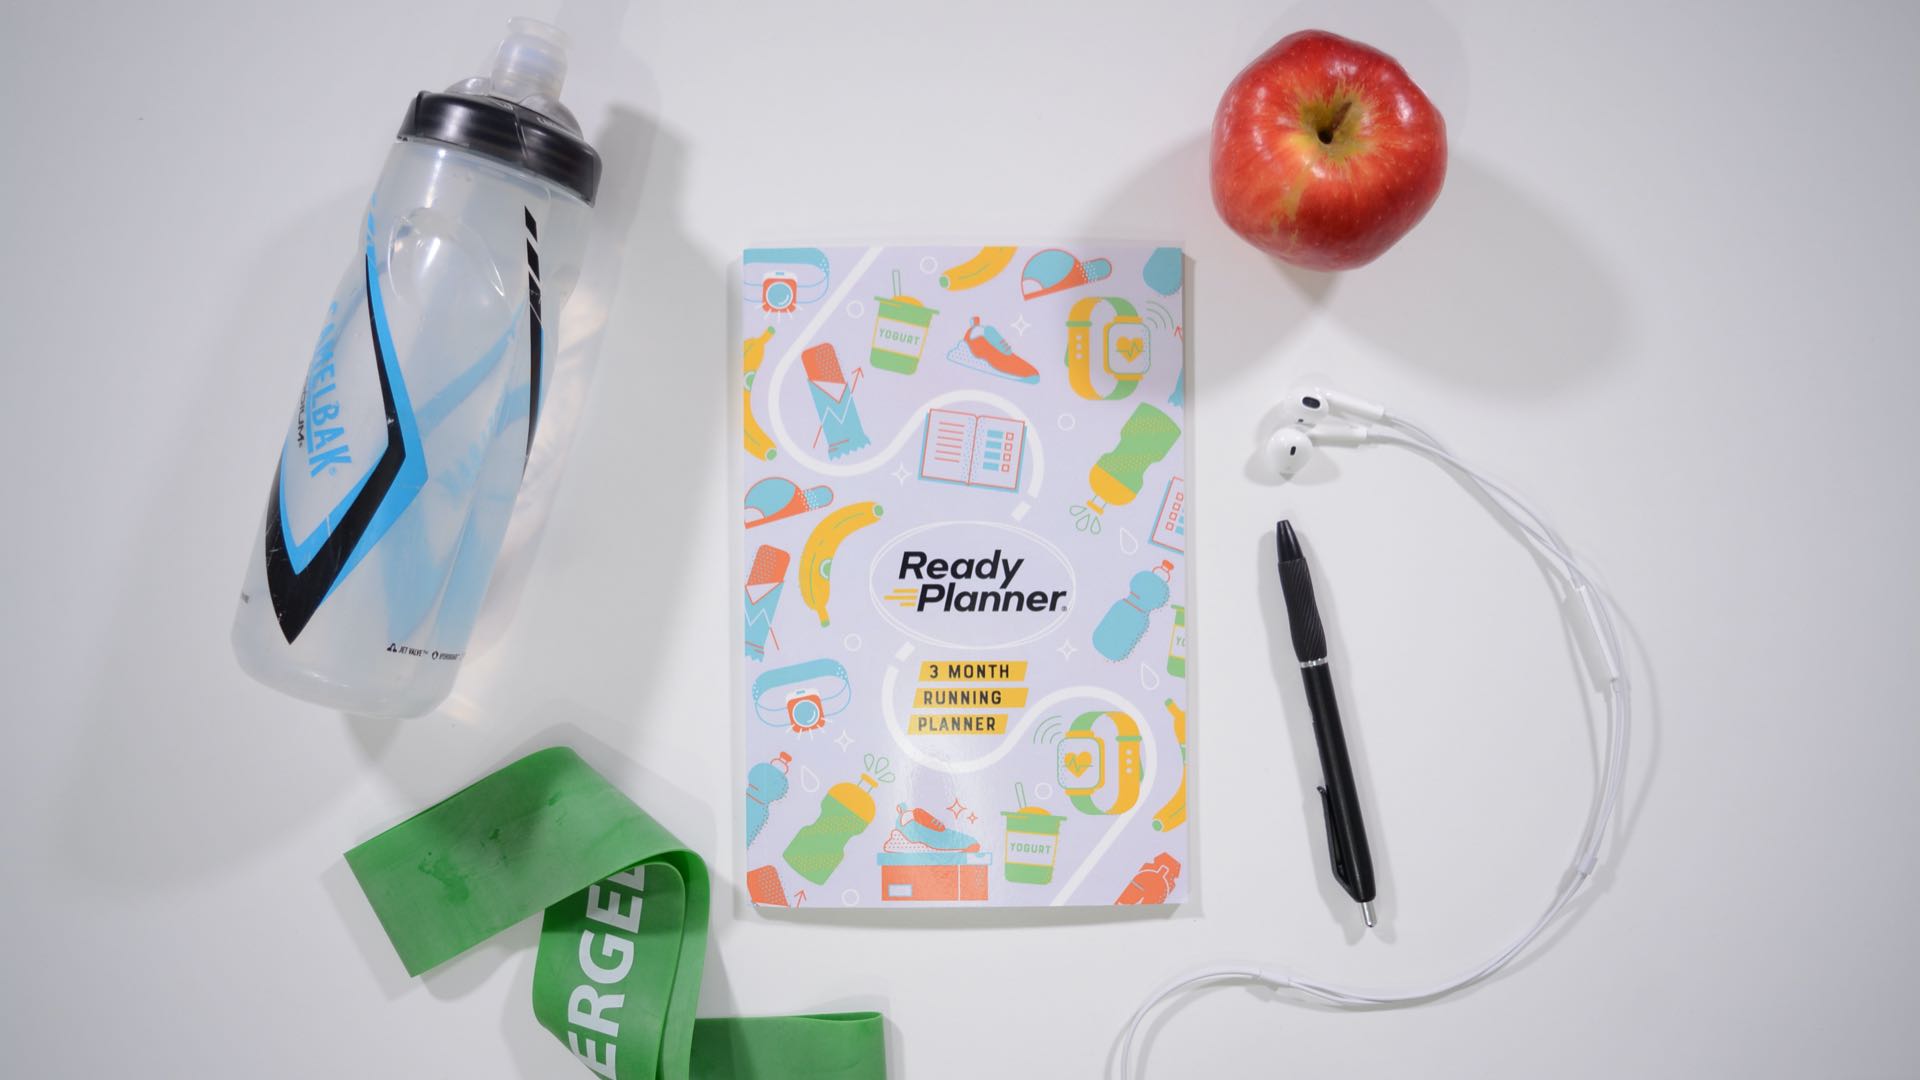 Top down view of planner with water bottle, headphones, and an apple